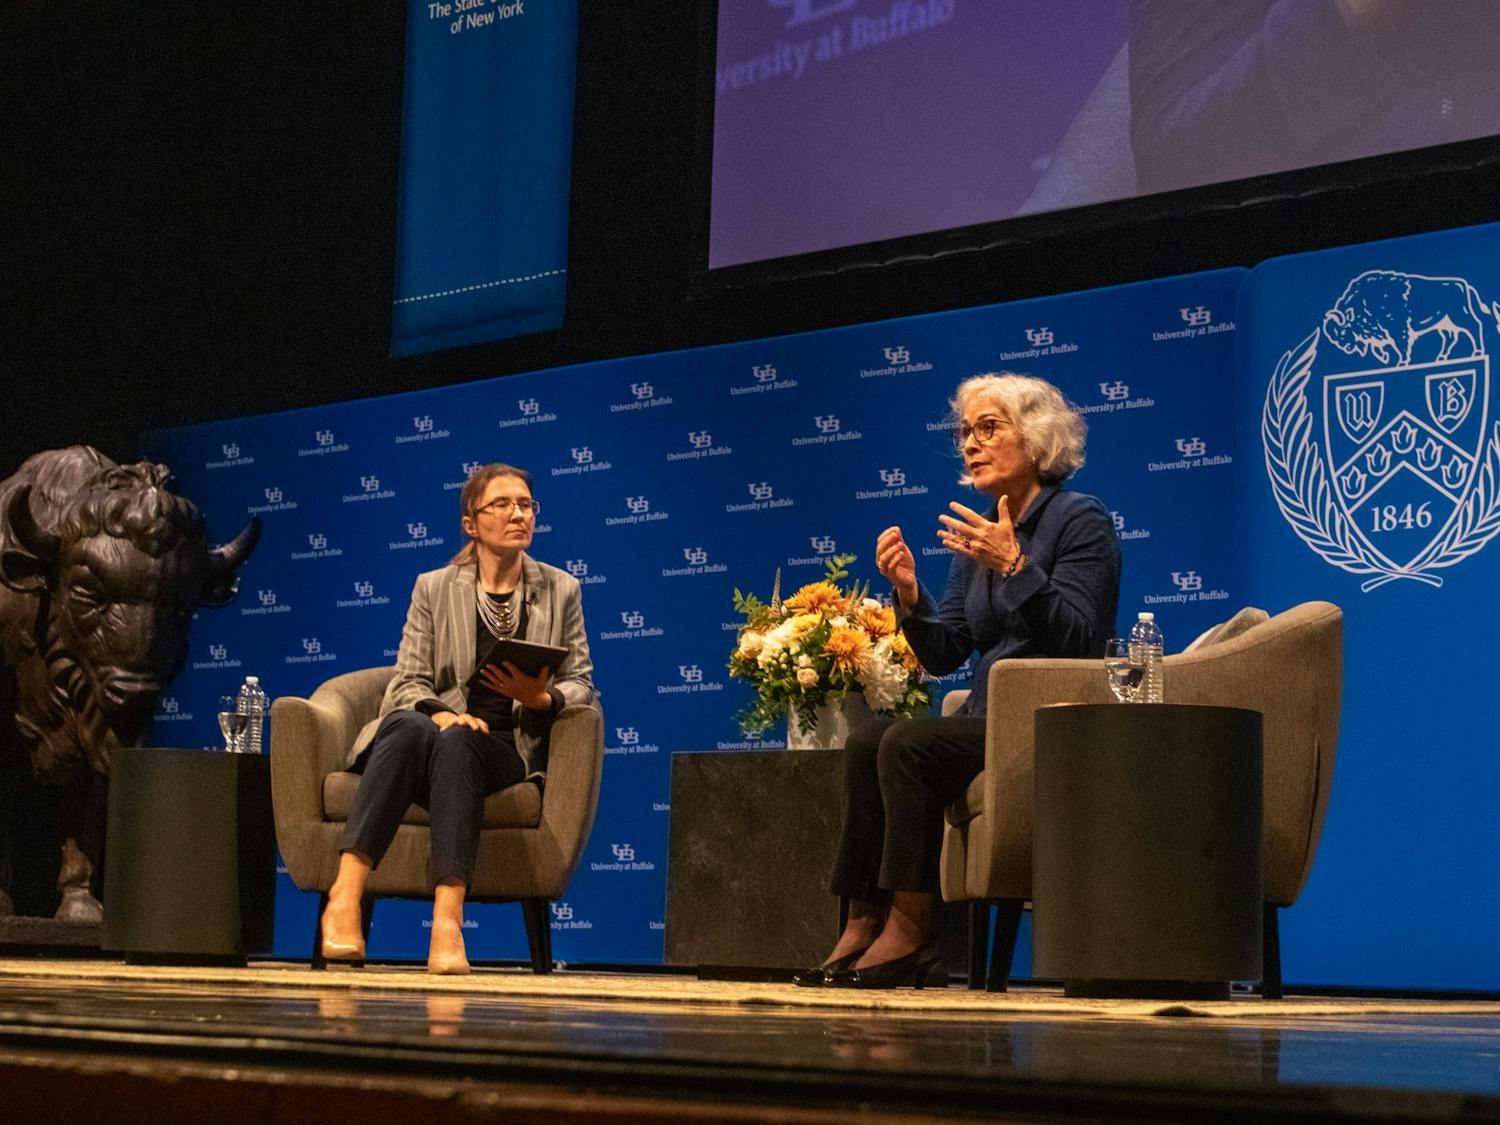 Marie Yovanovitch addressed the war between Russia and Ukraine in her Distinguished Speaker Series appearance at UB’s Center for the Arts Tuesday night.